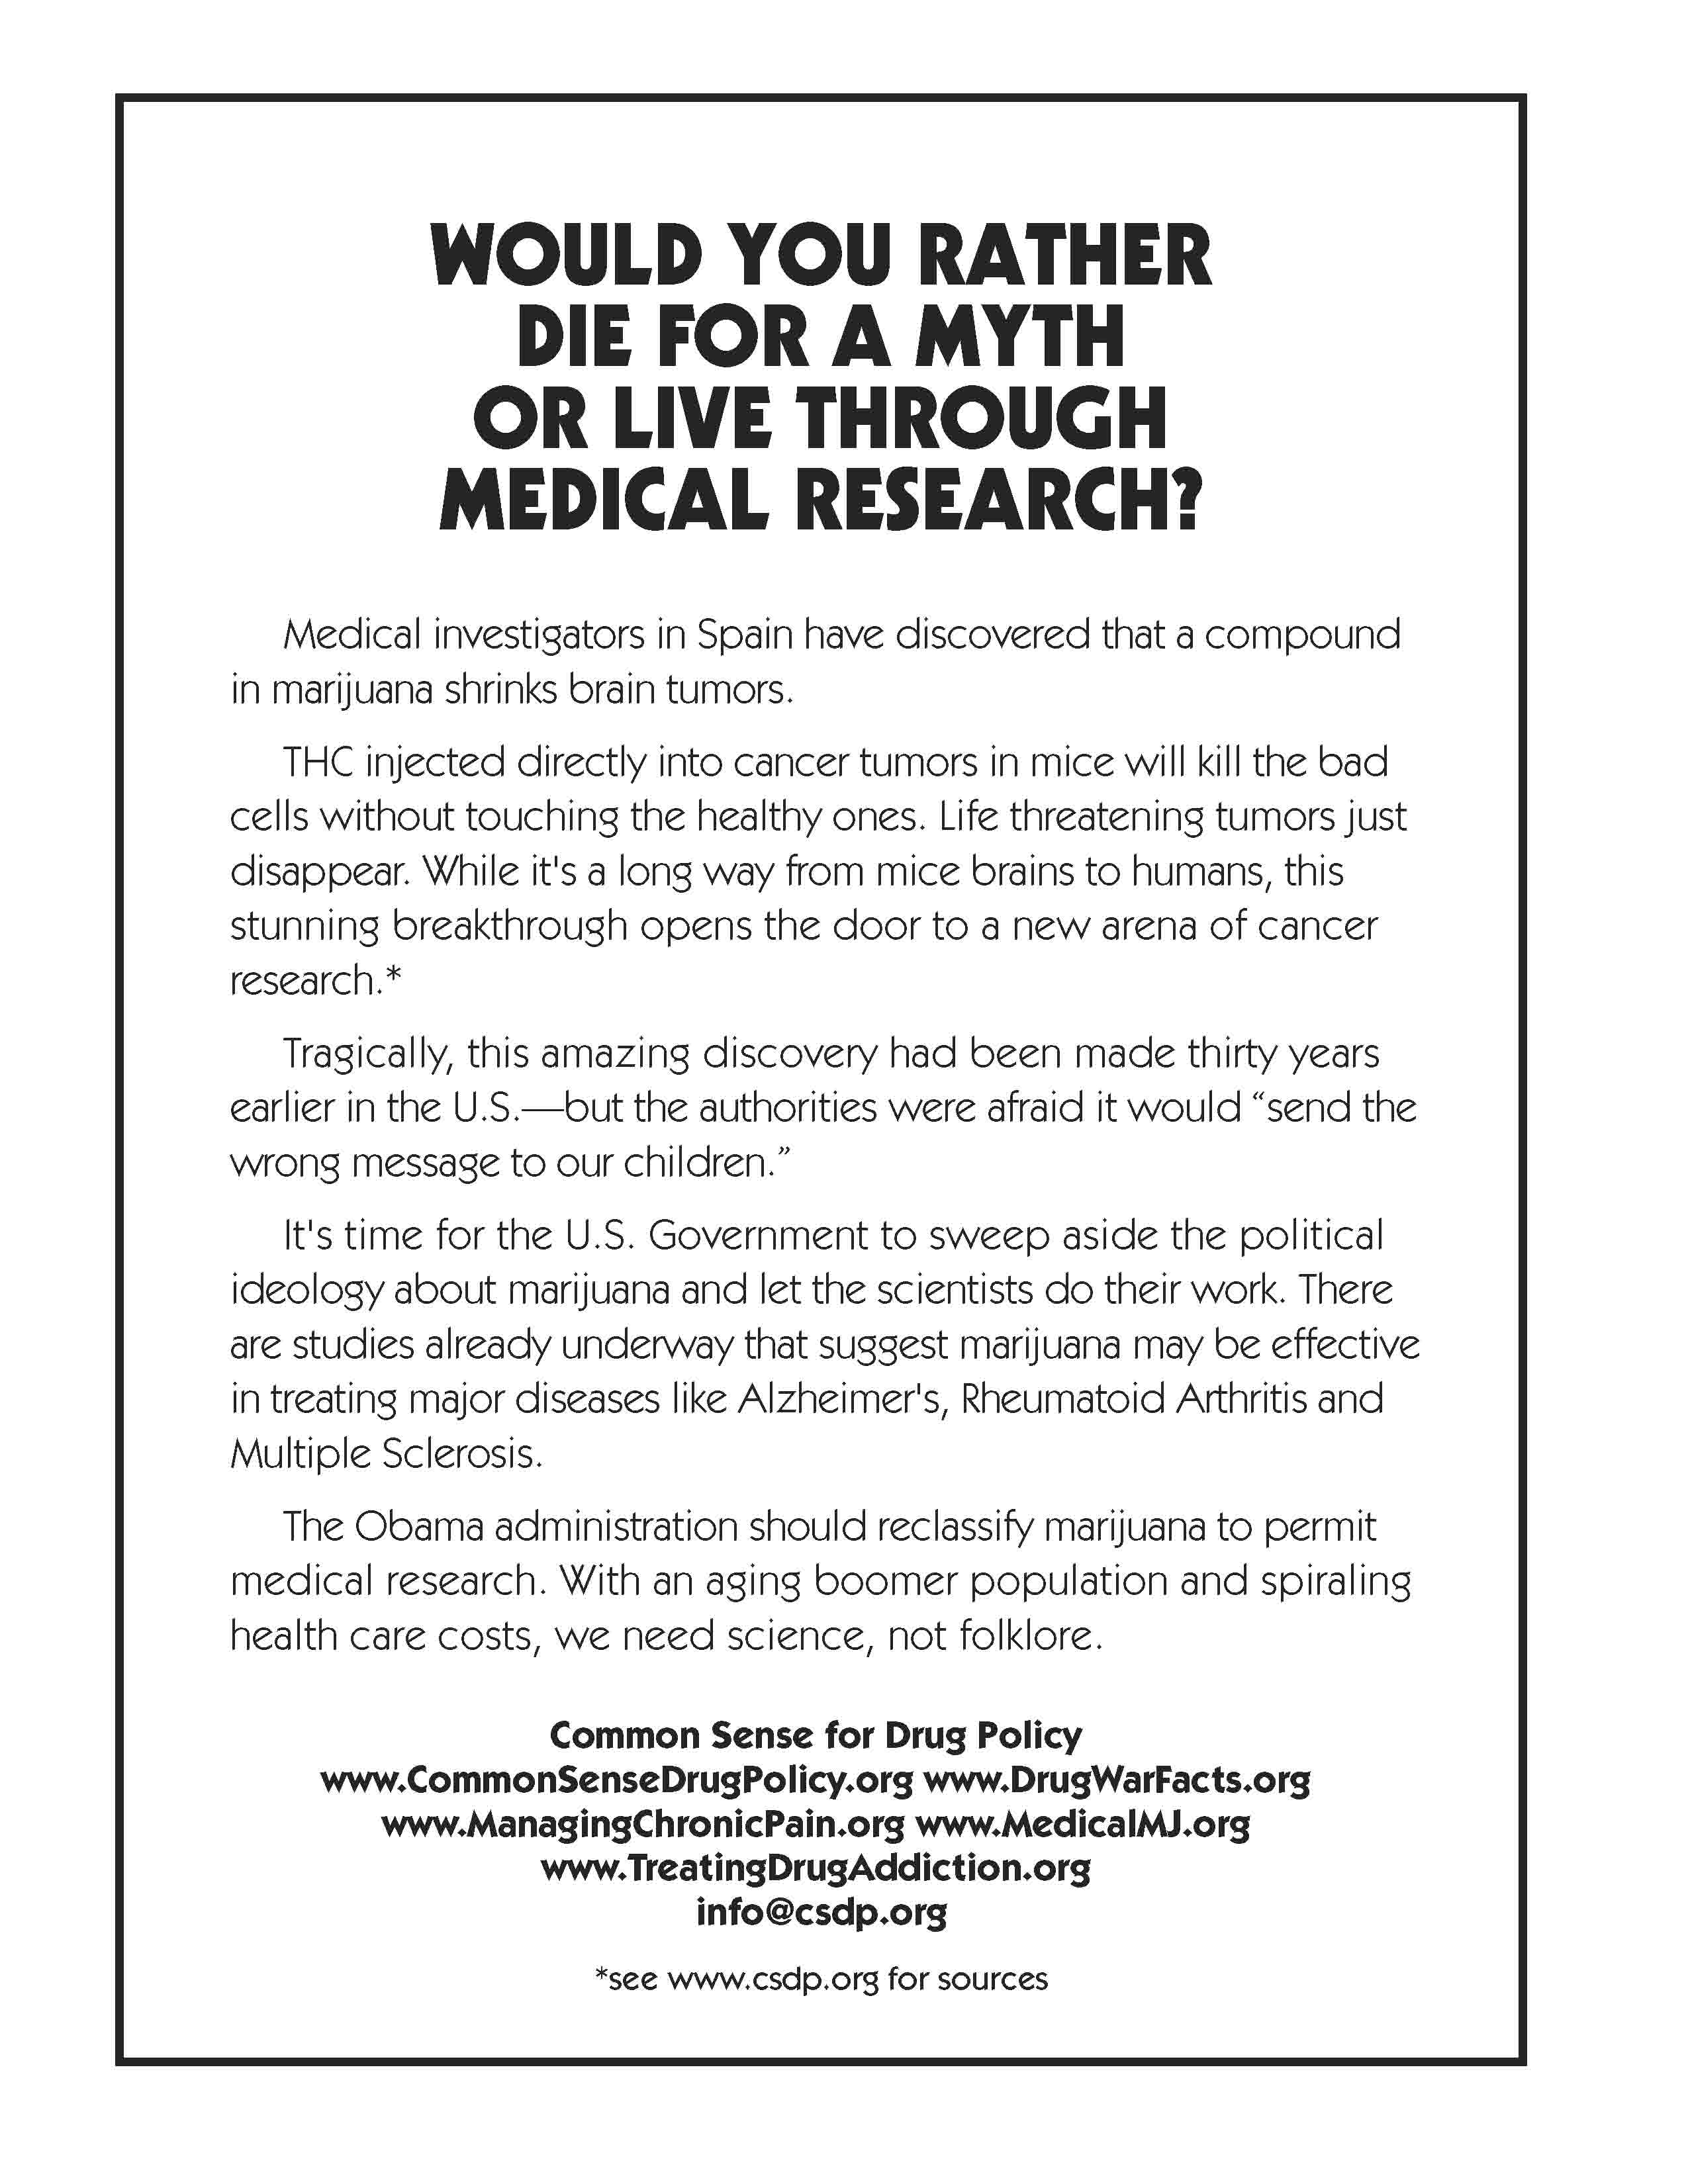 WOULD YOU RATHER DIE FOR A MYTH OR LIVE THROUGH MEDICAL RESEARCH?